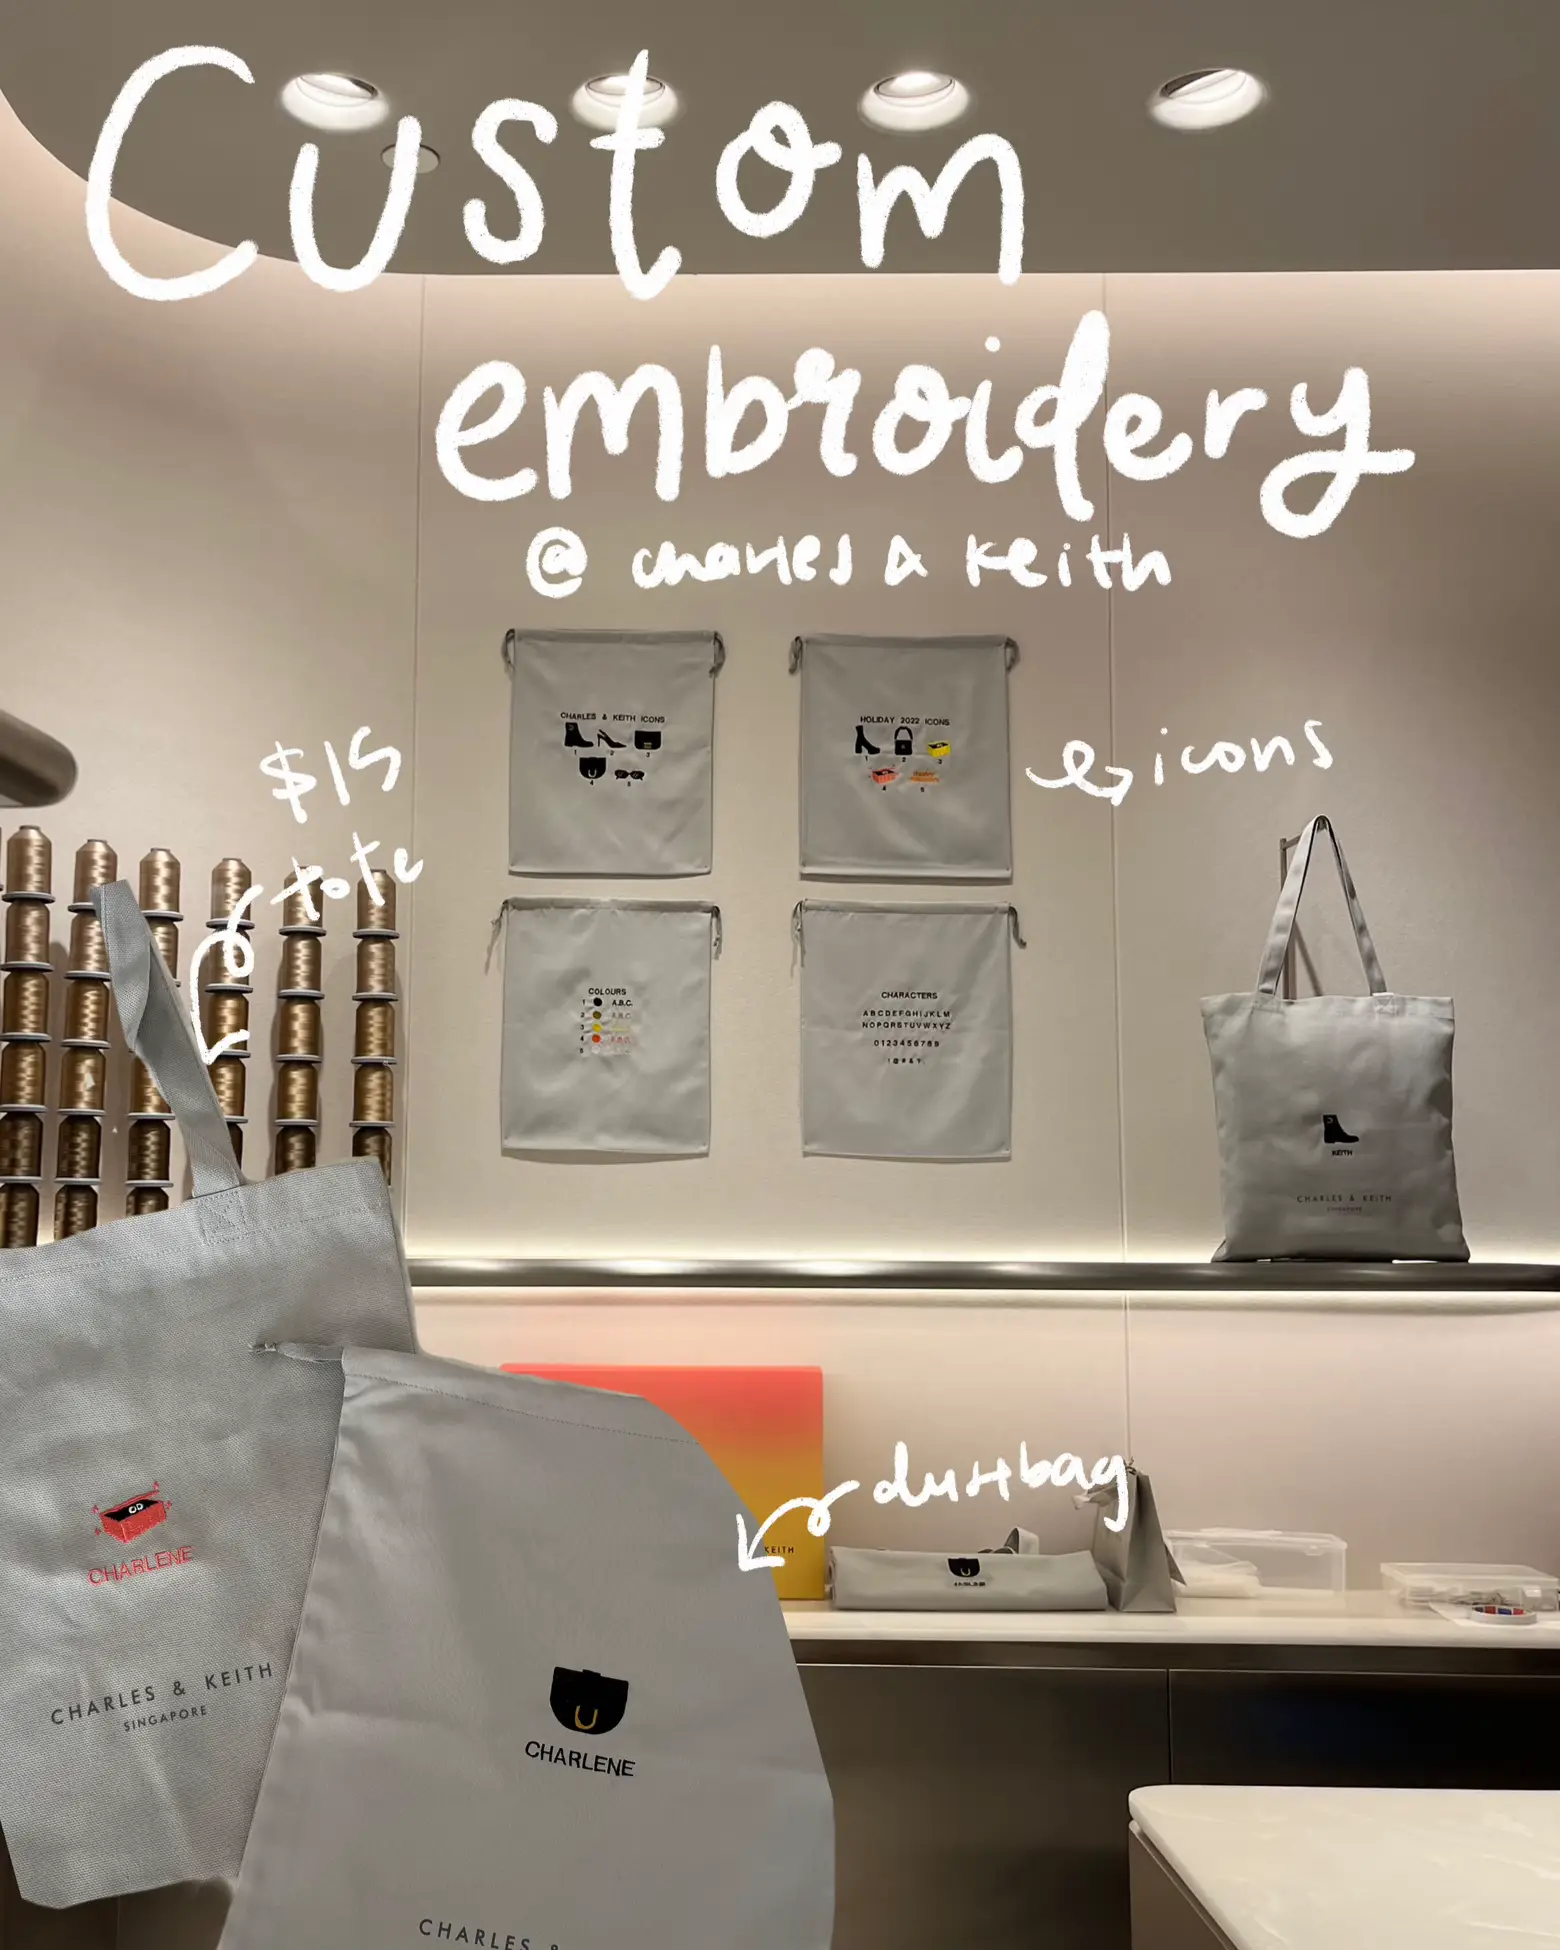 CHARLES & KEITH'S NEW TAKASHIMAYA STORE NOW HAS CUSTOM EMBROIDERY SERVICES  FROM $6! - Shout